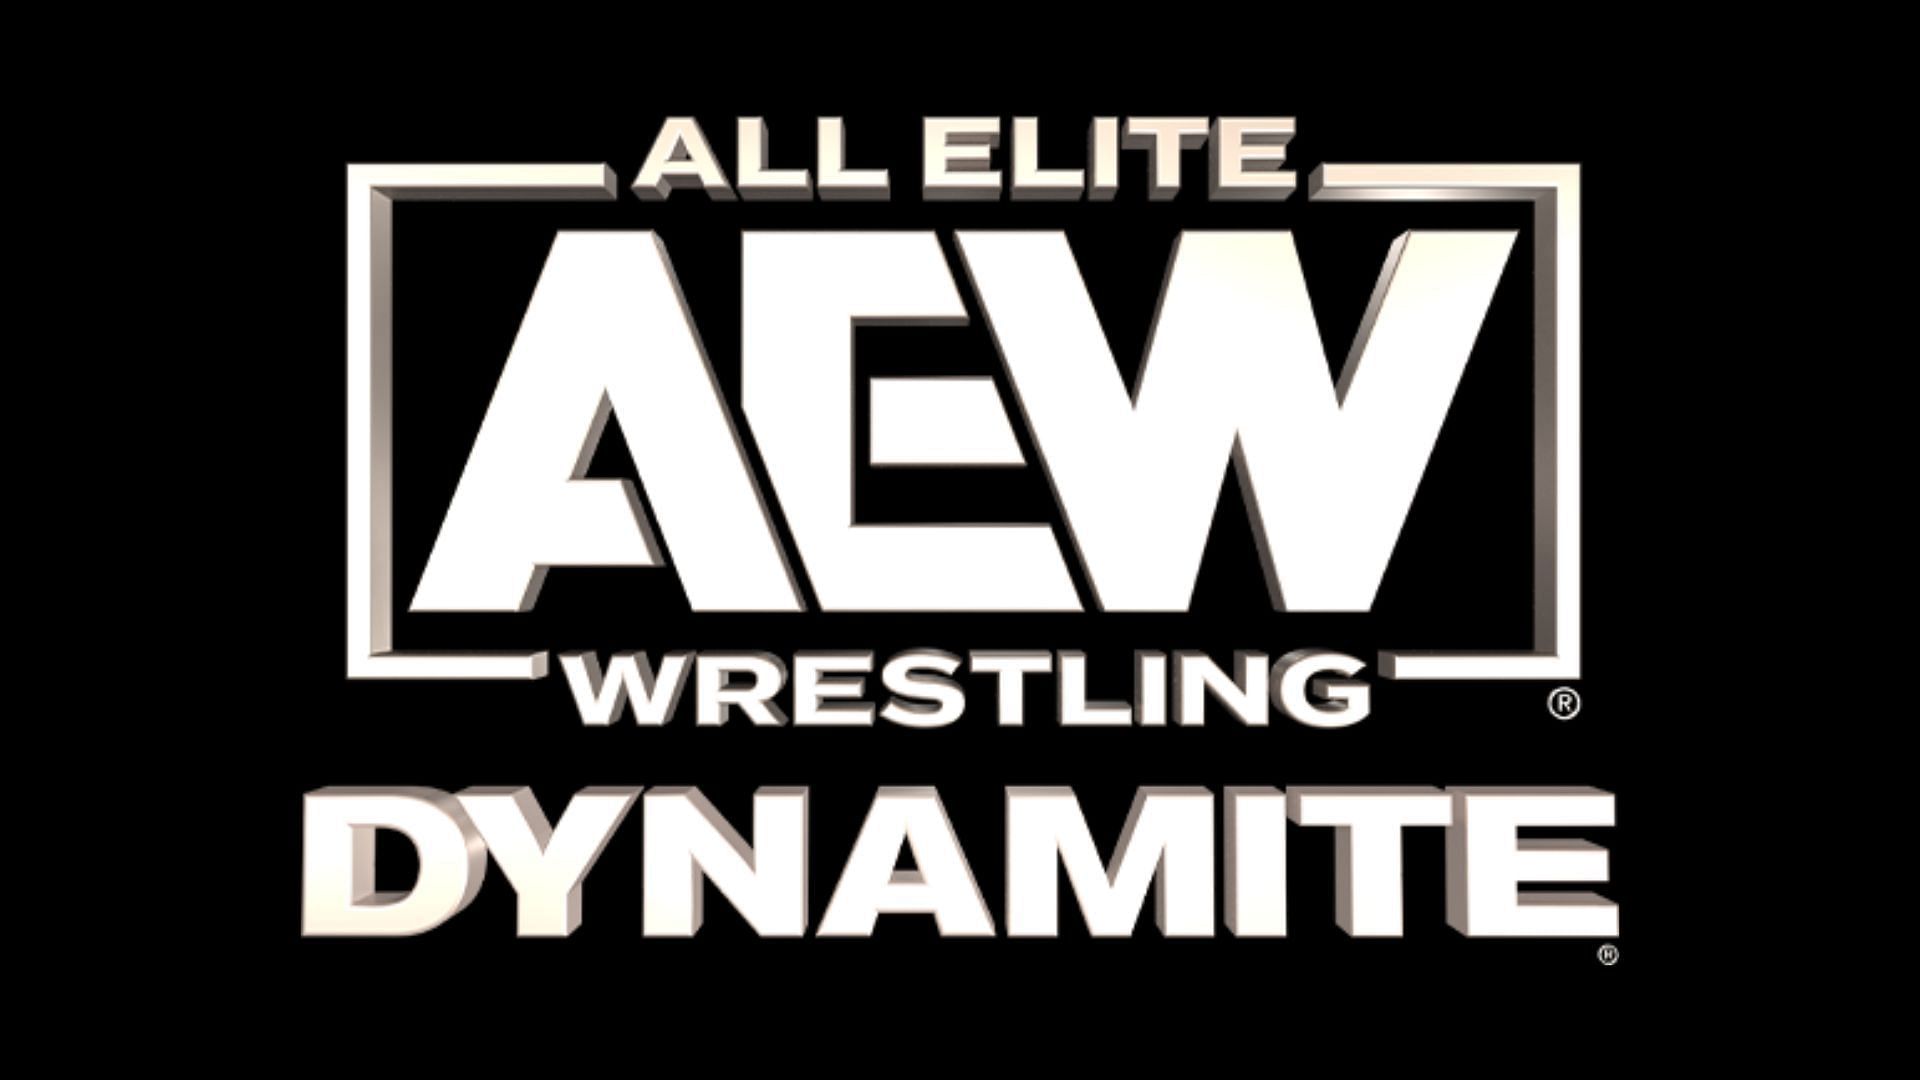 Was this episode of AEW Dynamite really that bad?